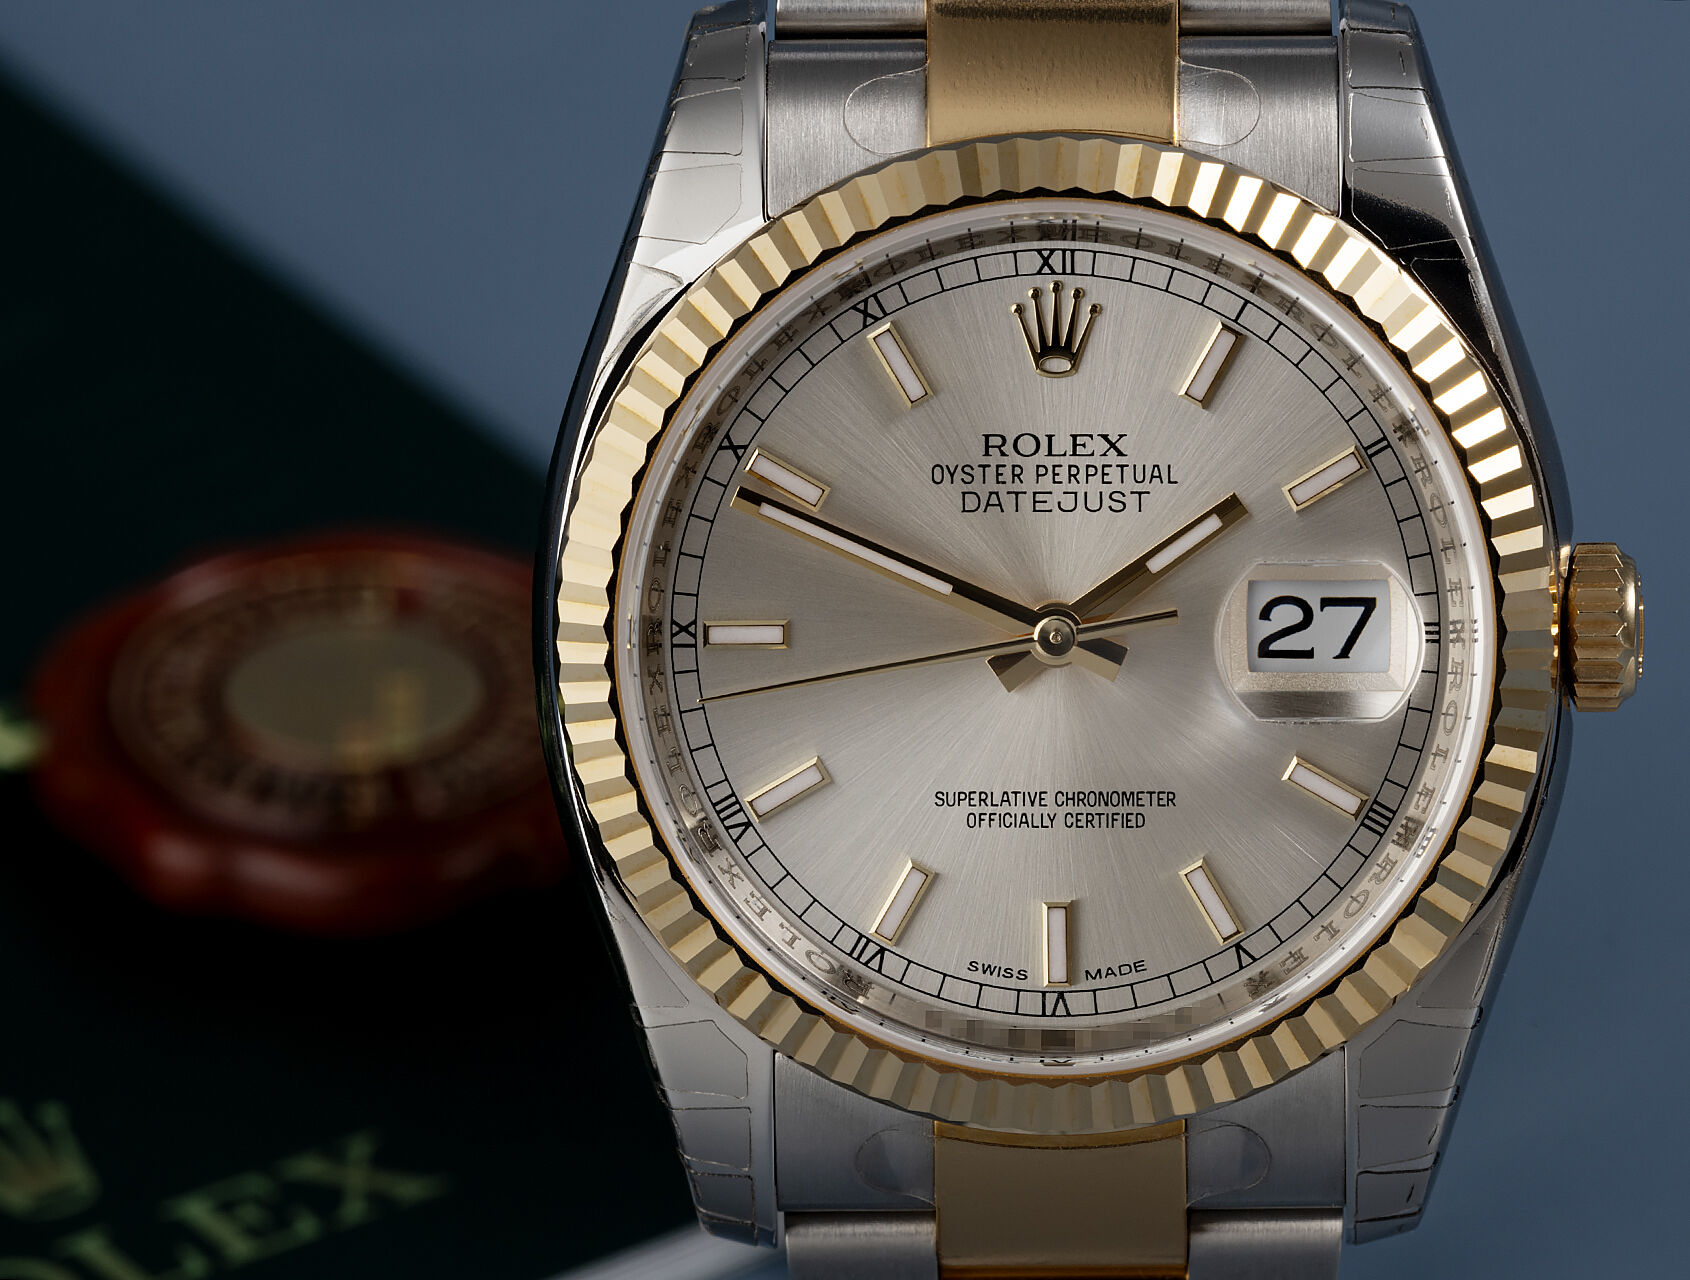 ref 116233 | 116233 - New Old Stock | Rolex Datejust